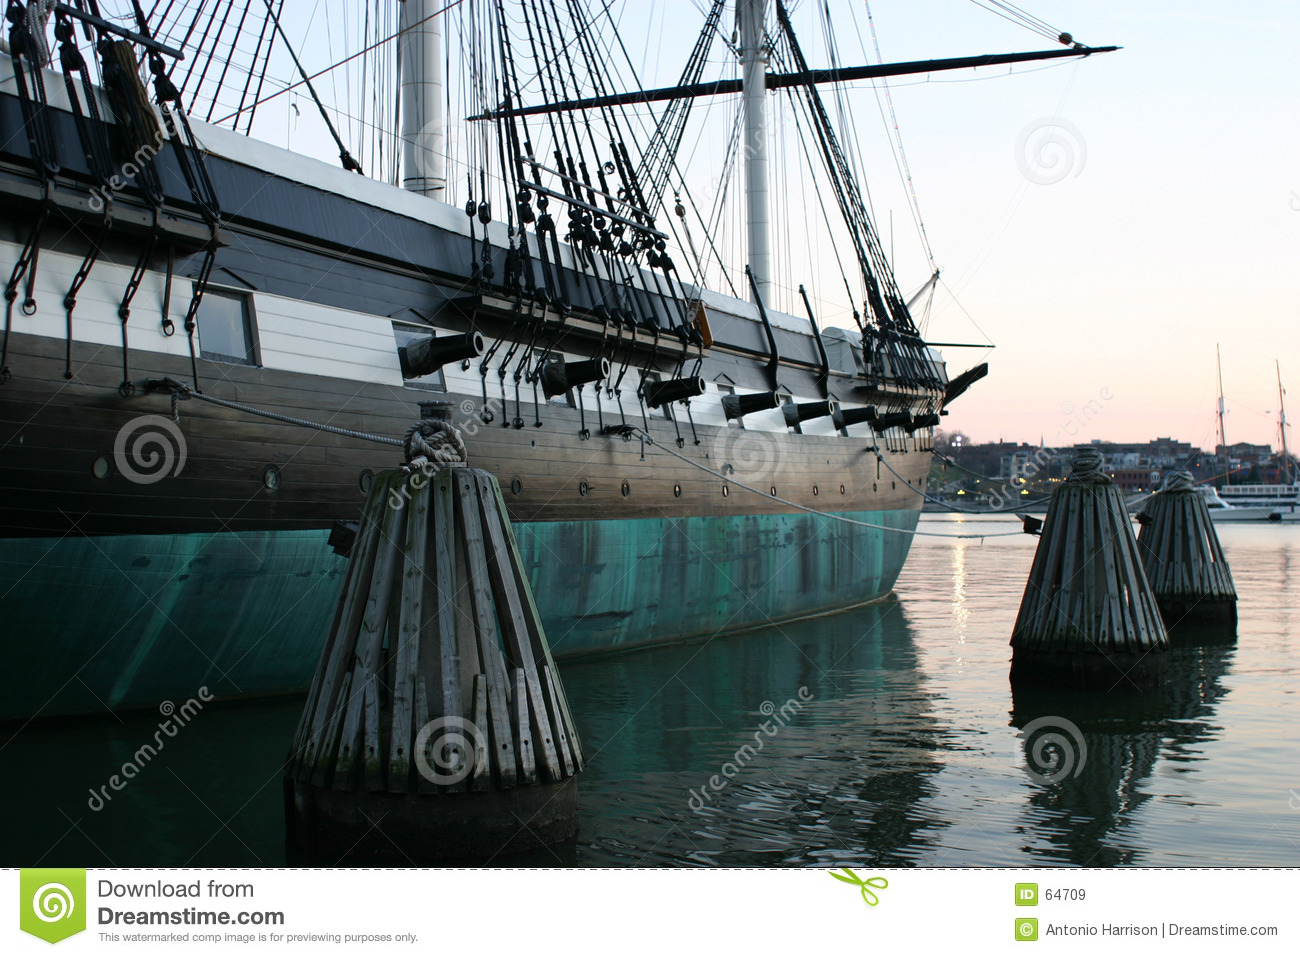 Colonial Ship 2 Royalty Free Stock Images   Image  64709